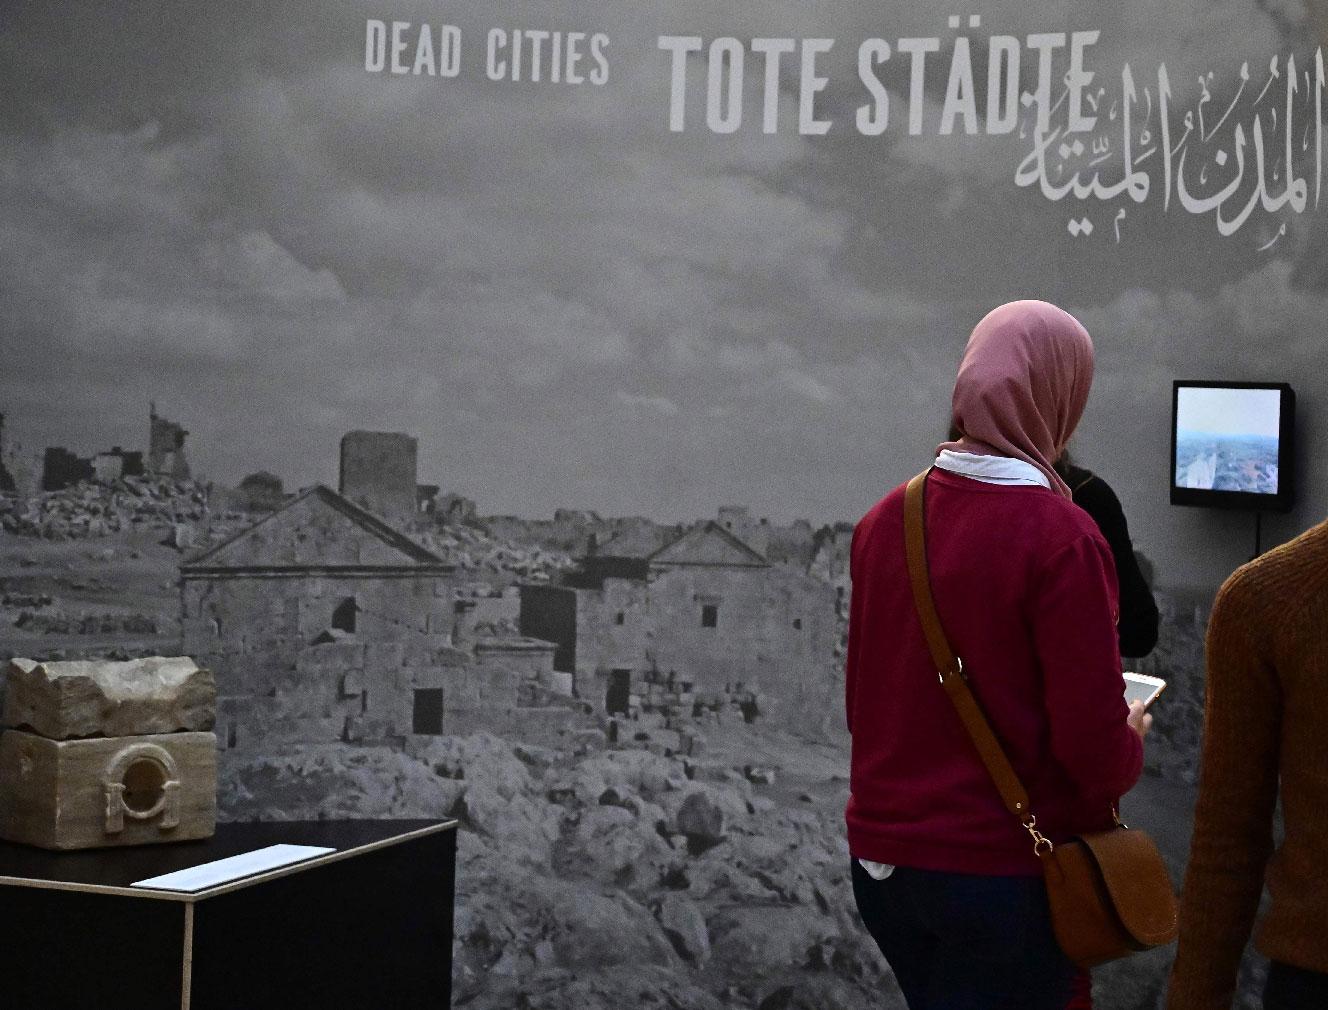 A woman visits the exhibition titled "Cultural Landscape of Syria - Preservation and Archiving in Times of War" at the Museum of Islamic Art in the Pergamon Museum on February 27, 2019 in Berlin.